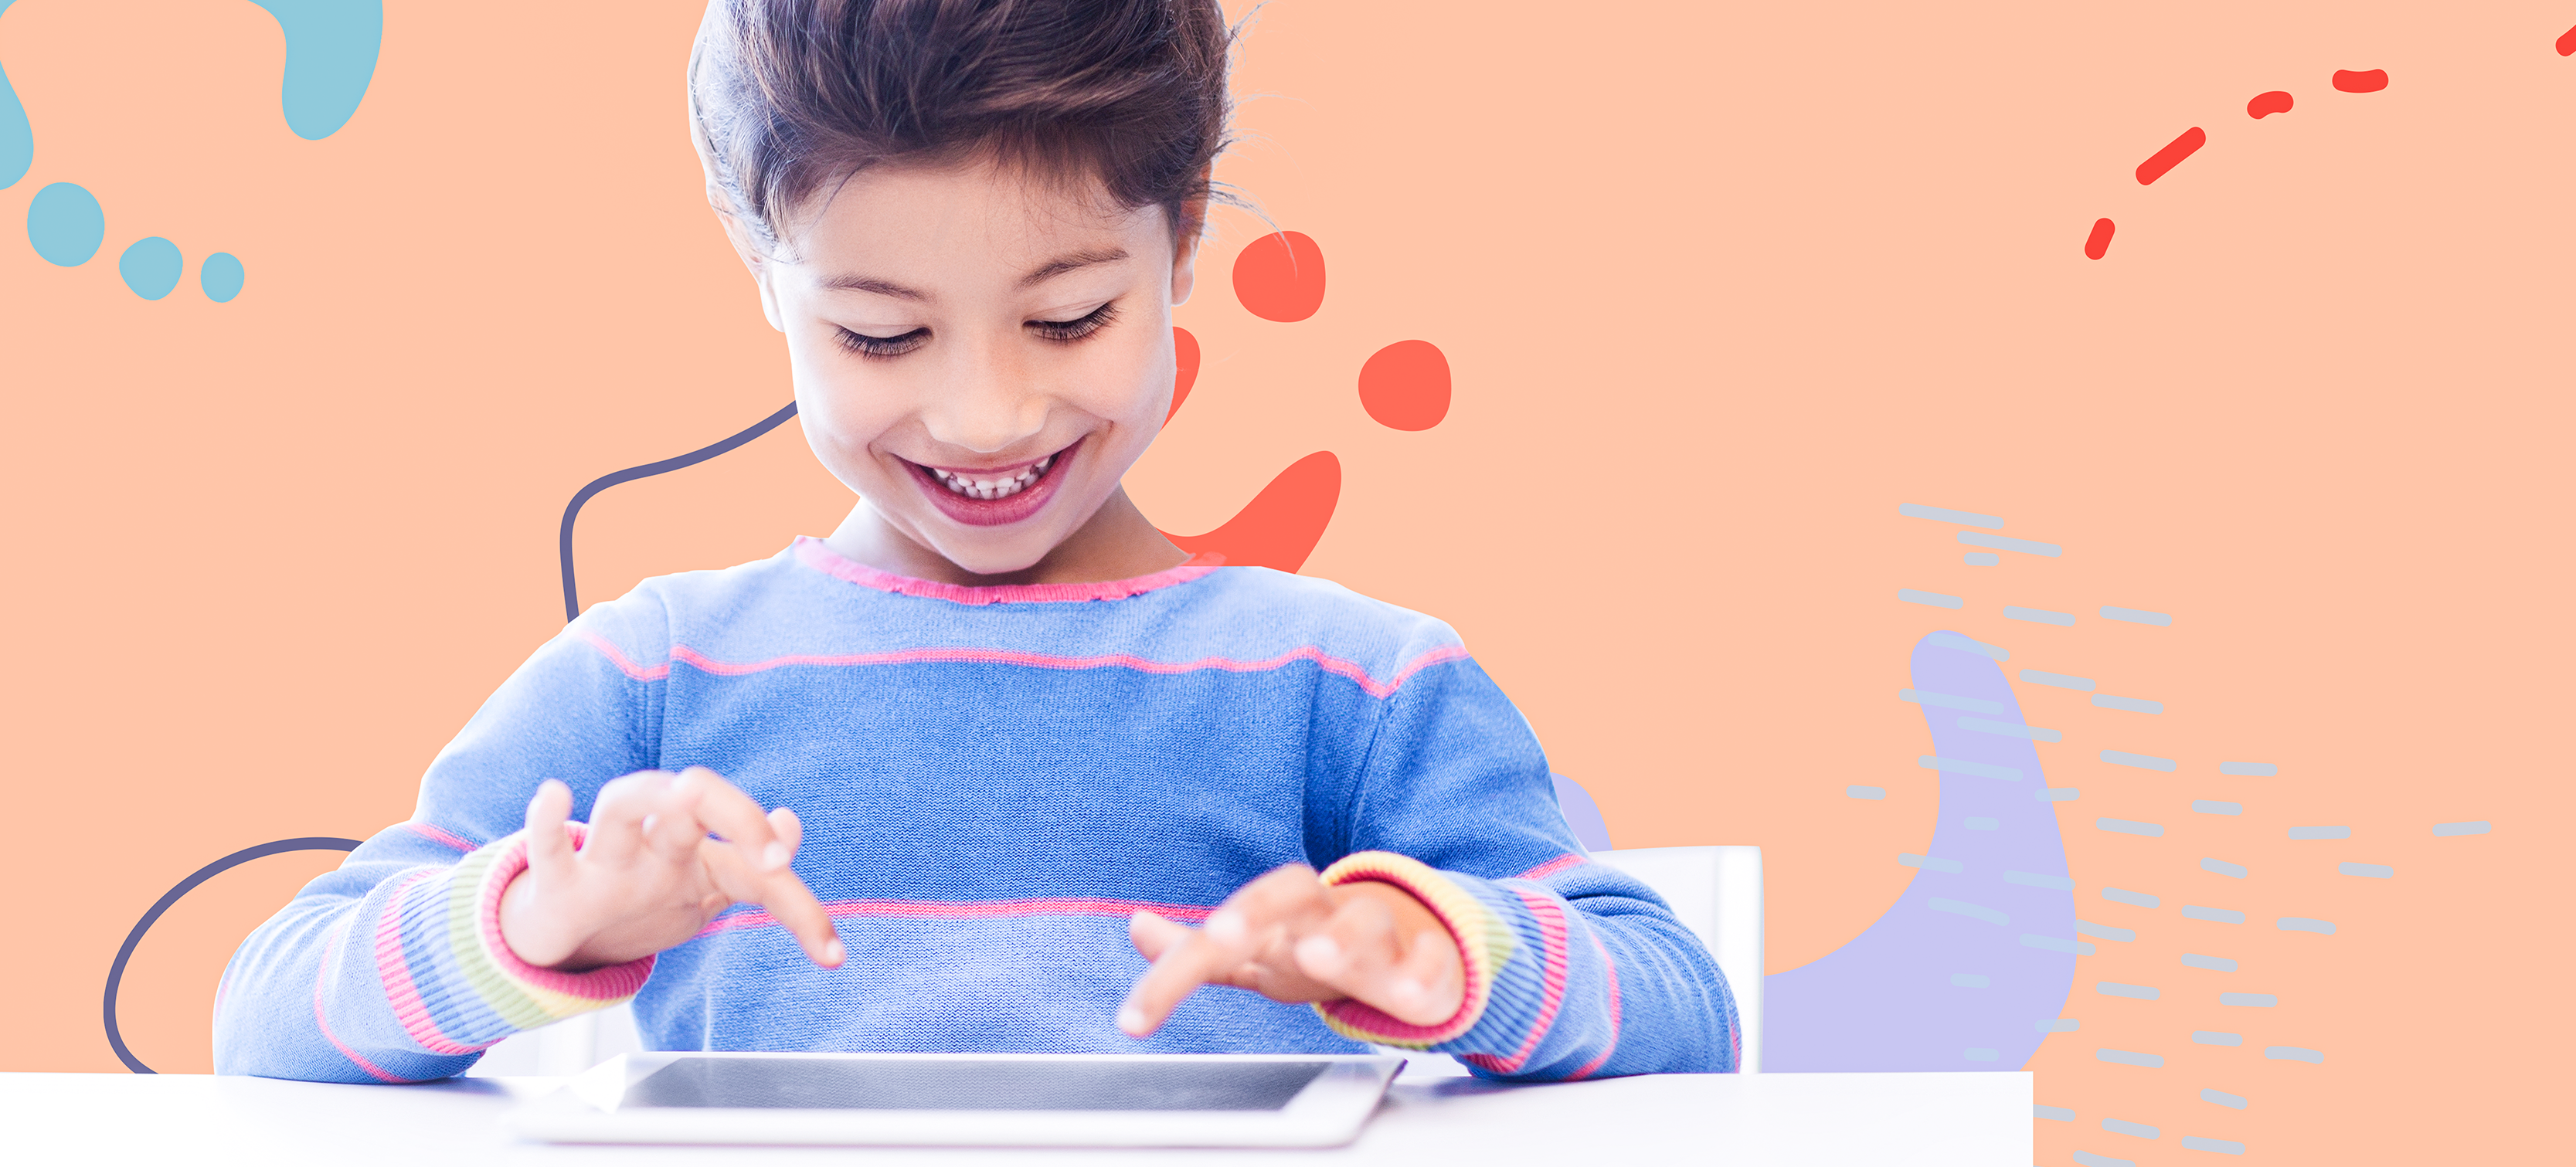 How to Encourage Kids to Learn Arabic Online